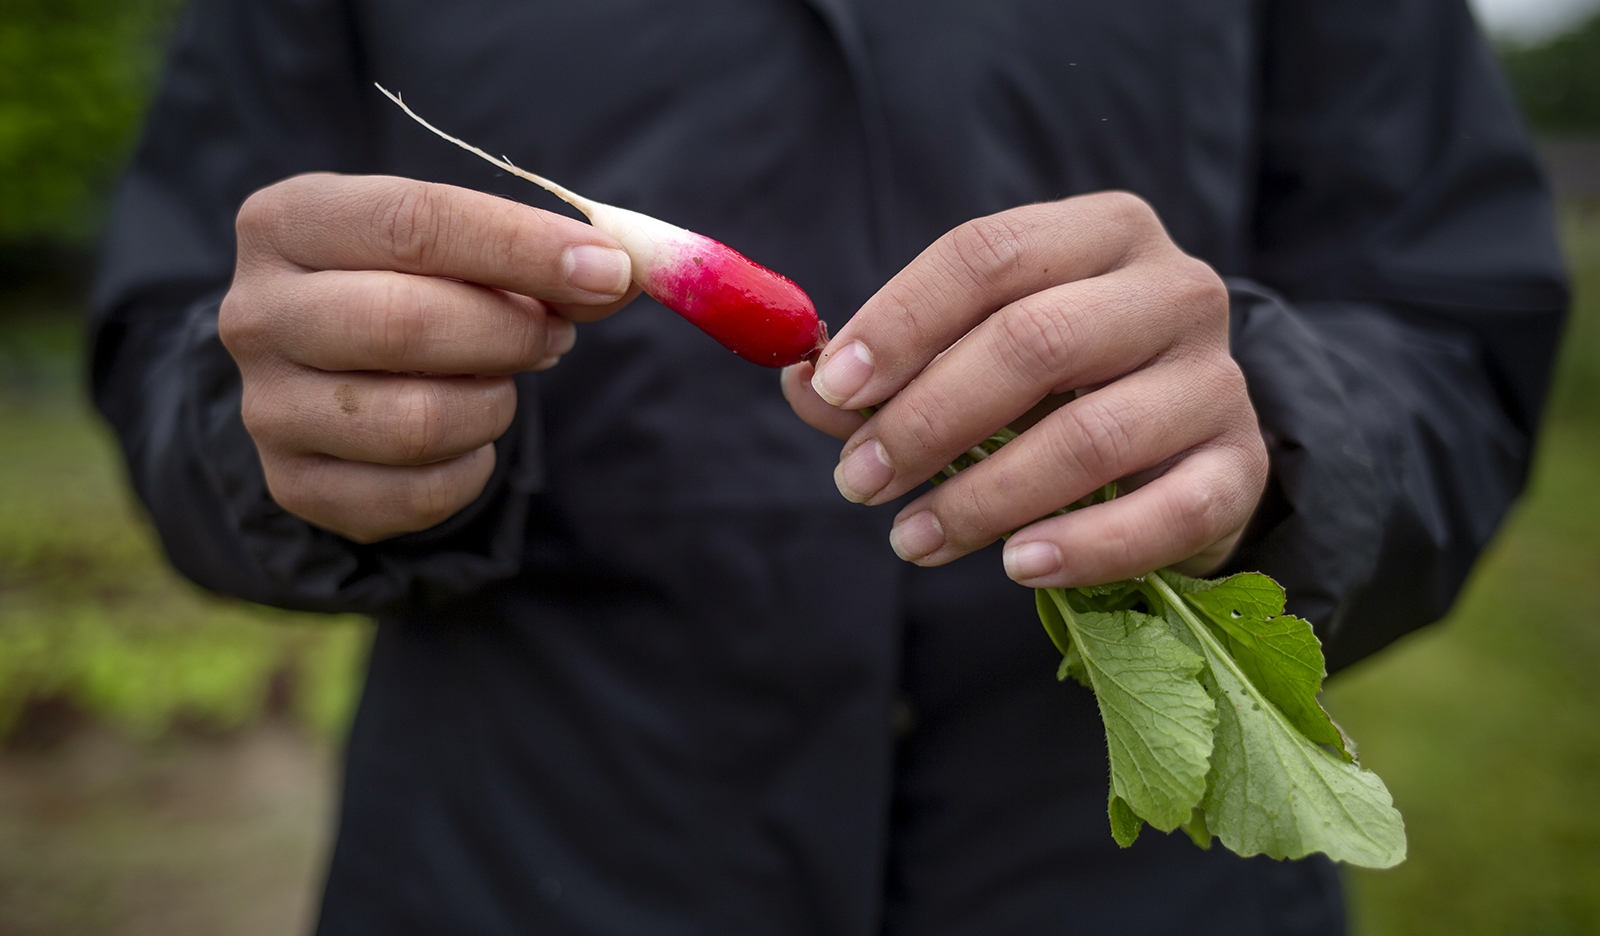 A man holds a radish freshly picked from the ground